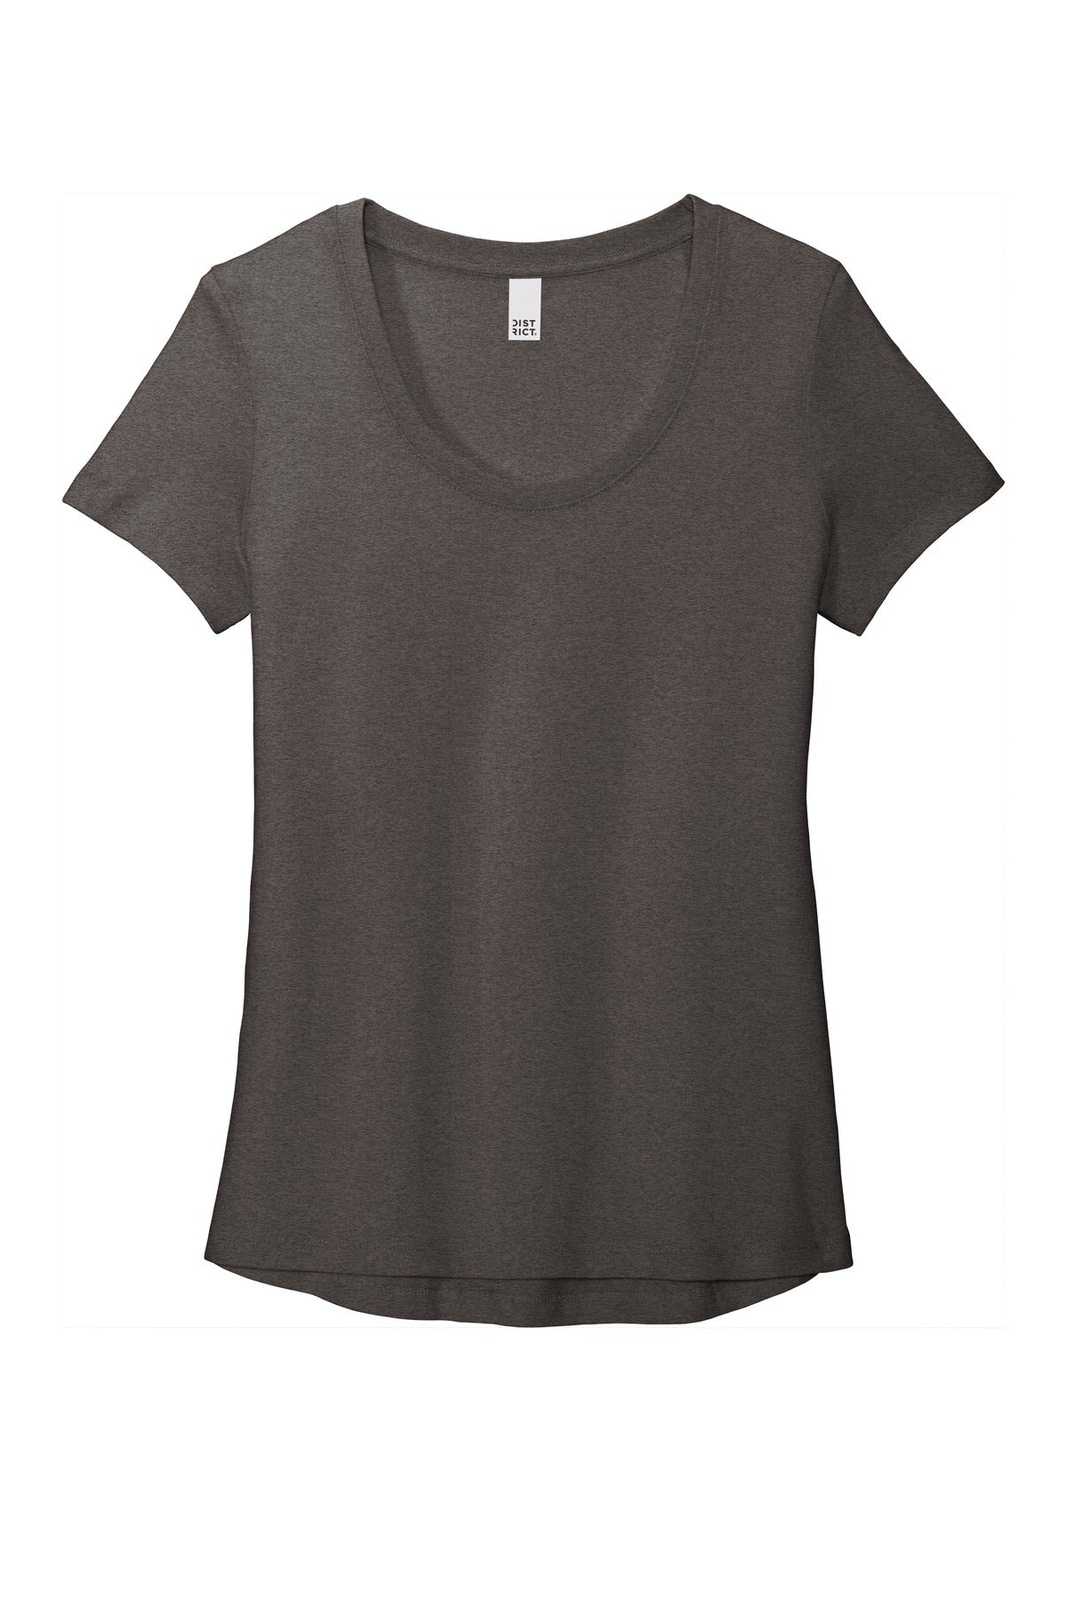 District DT7501 Womens Flex Scoop Neck Tee - Heathered Charcoal - HIT a Double - 5